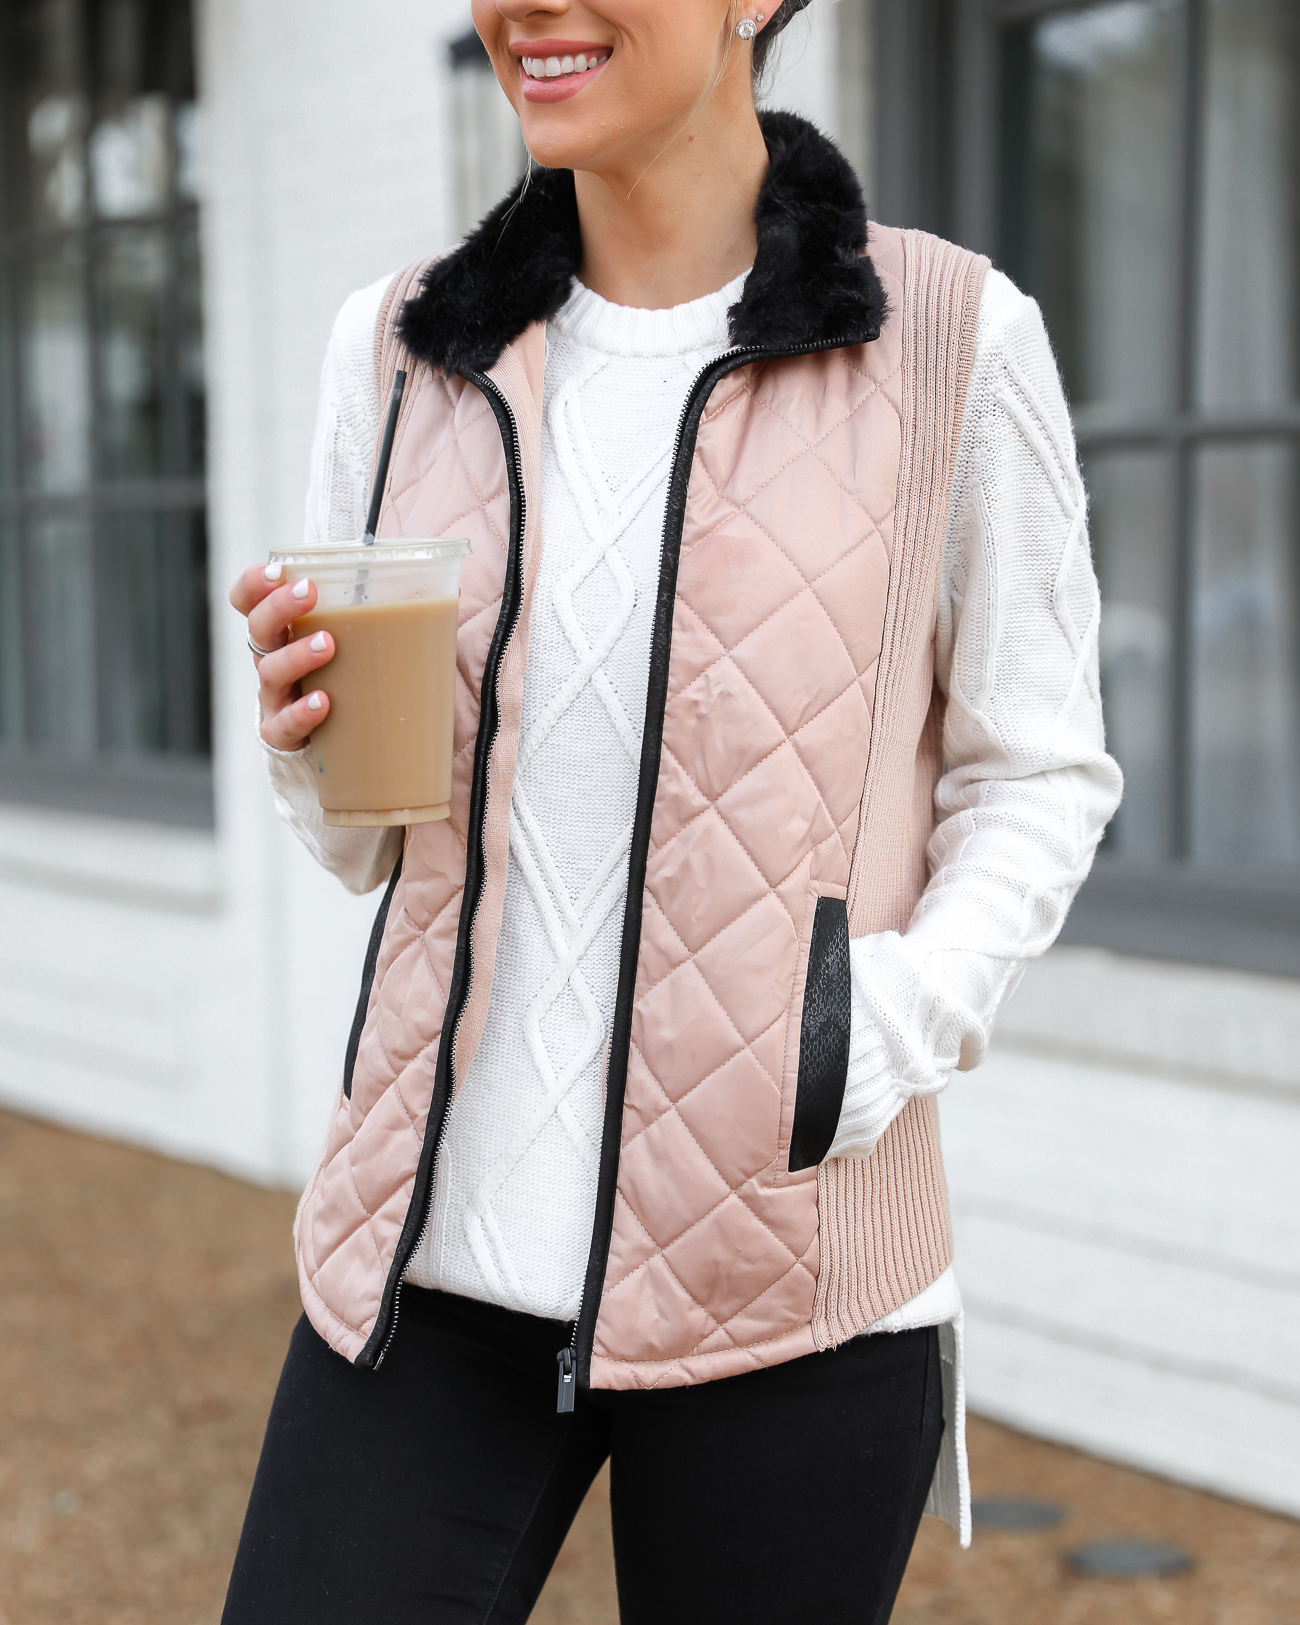 Walmart Tan and Black Quilted Vest Superga leopard velvet sneakers Black skinny jeans White knit tunic sweater Lord & Taylor Laura Beverlin-10